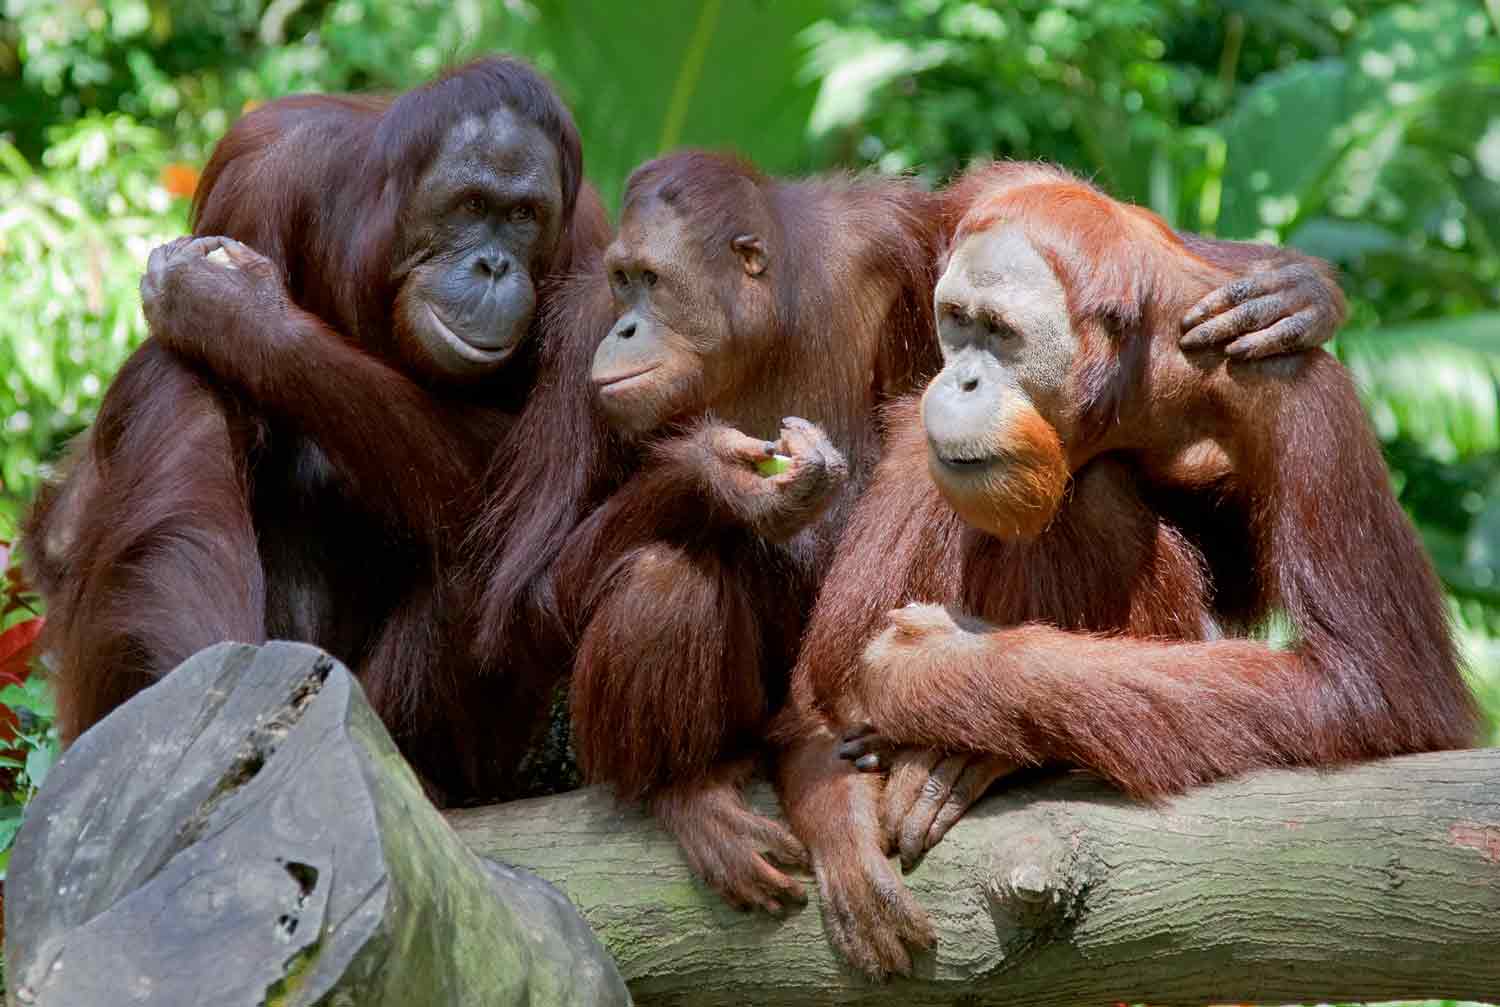 Three orangutans sit on a branch. The second one has its arm around the third one.